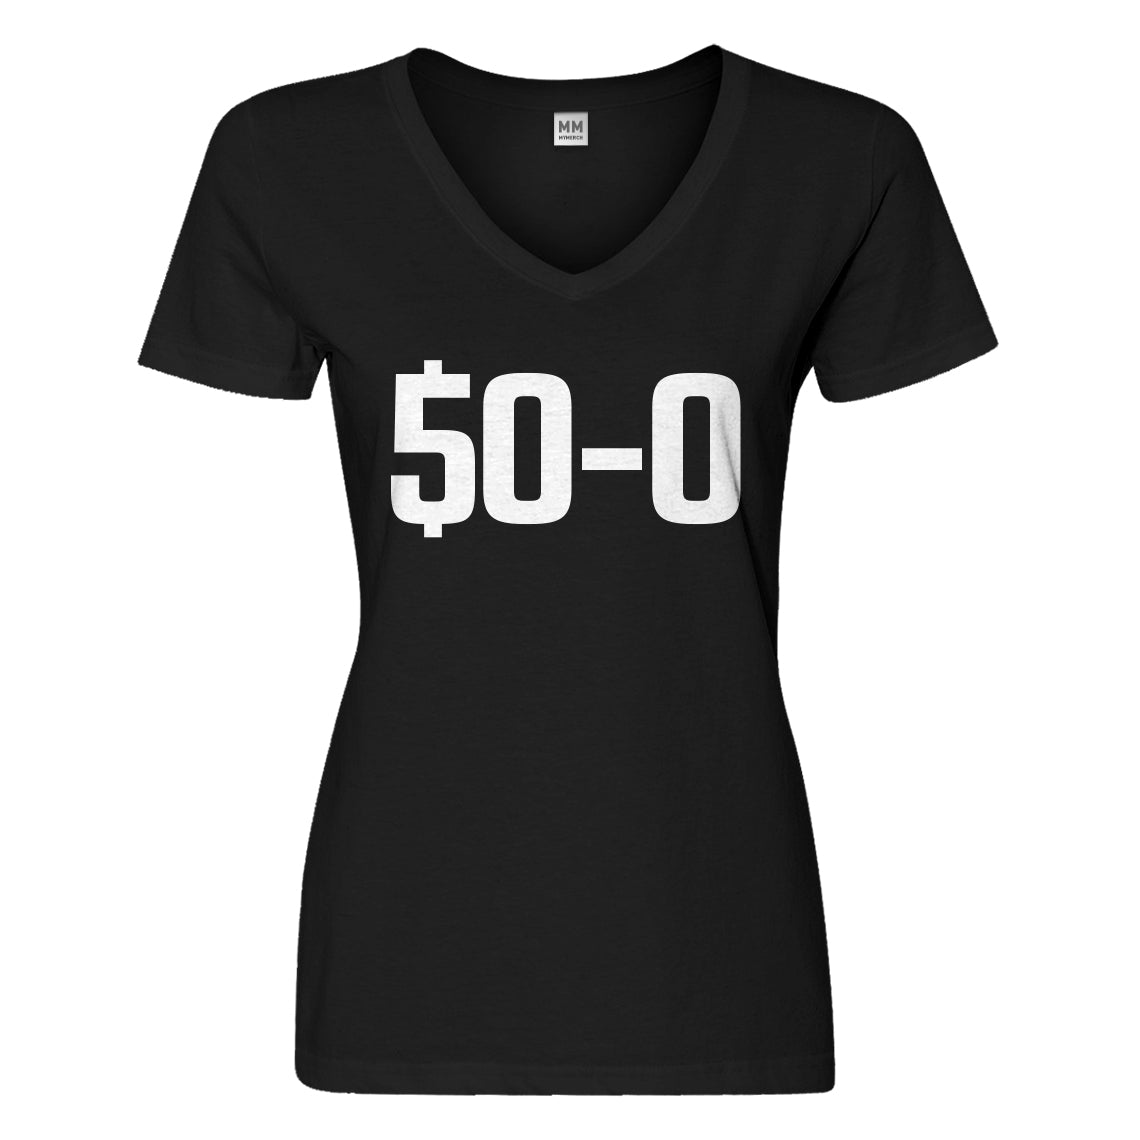 Womens 50-0 Undefeated Vneck T-shirt